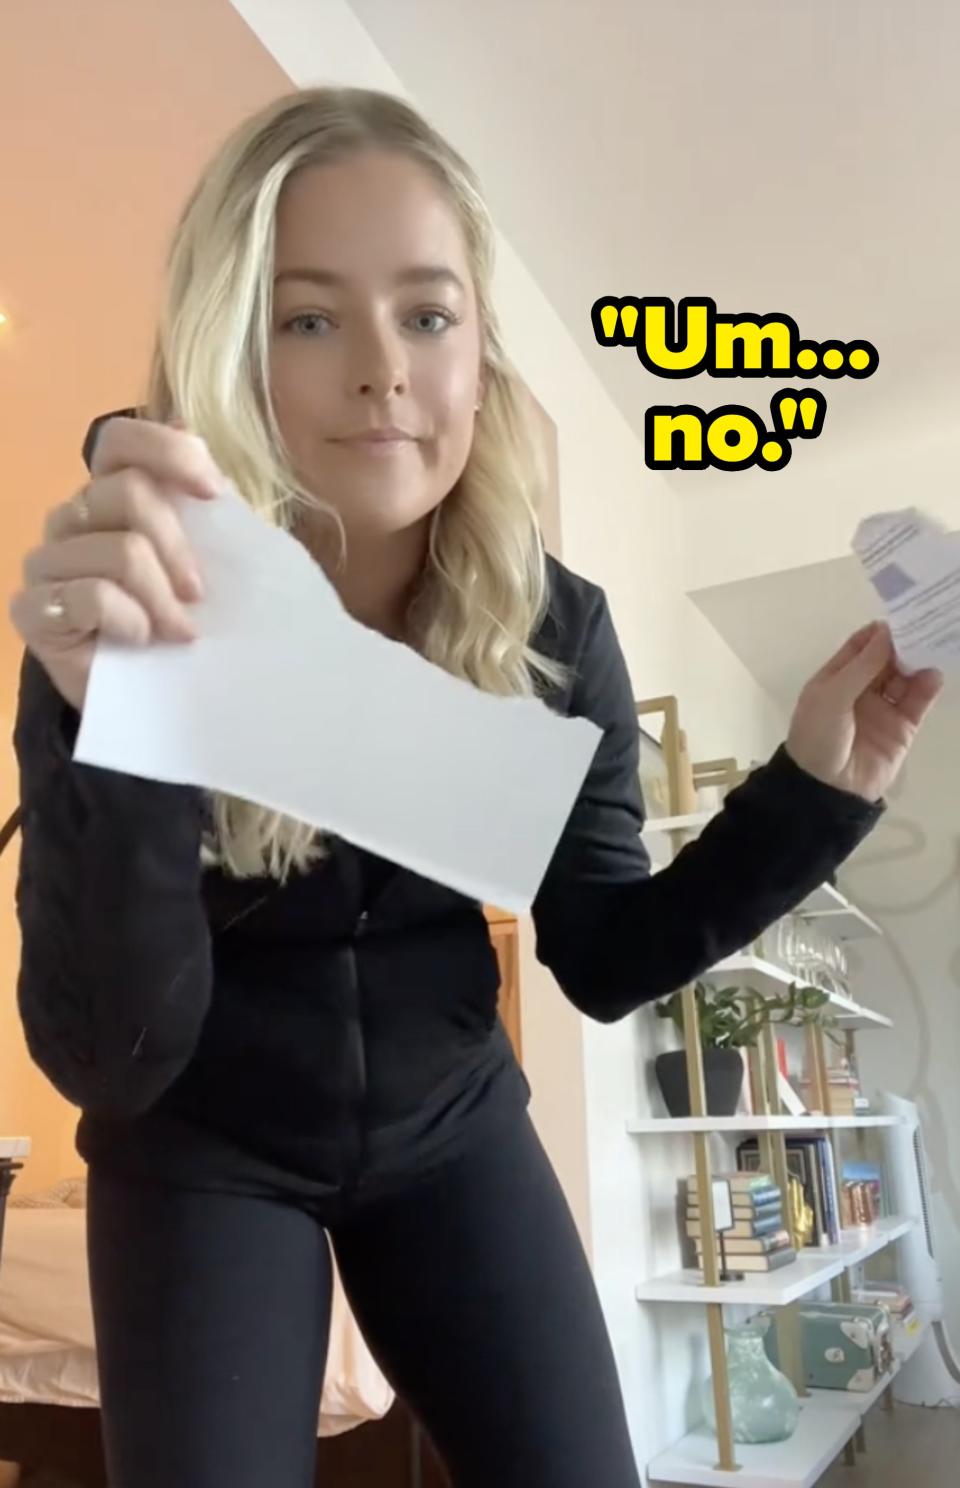 Woman in black outfit holding out a piece of paper towards the camera